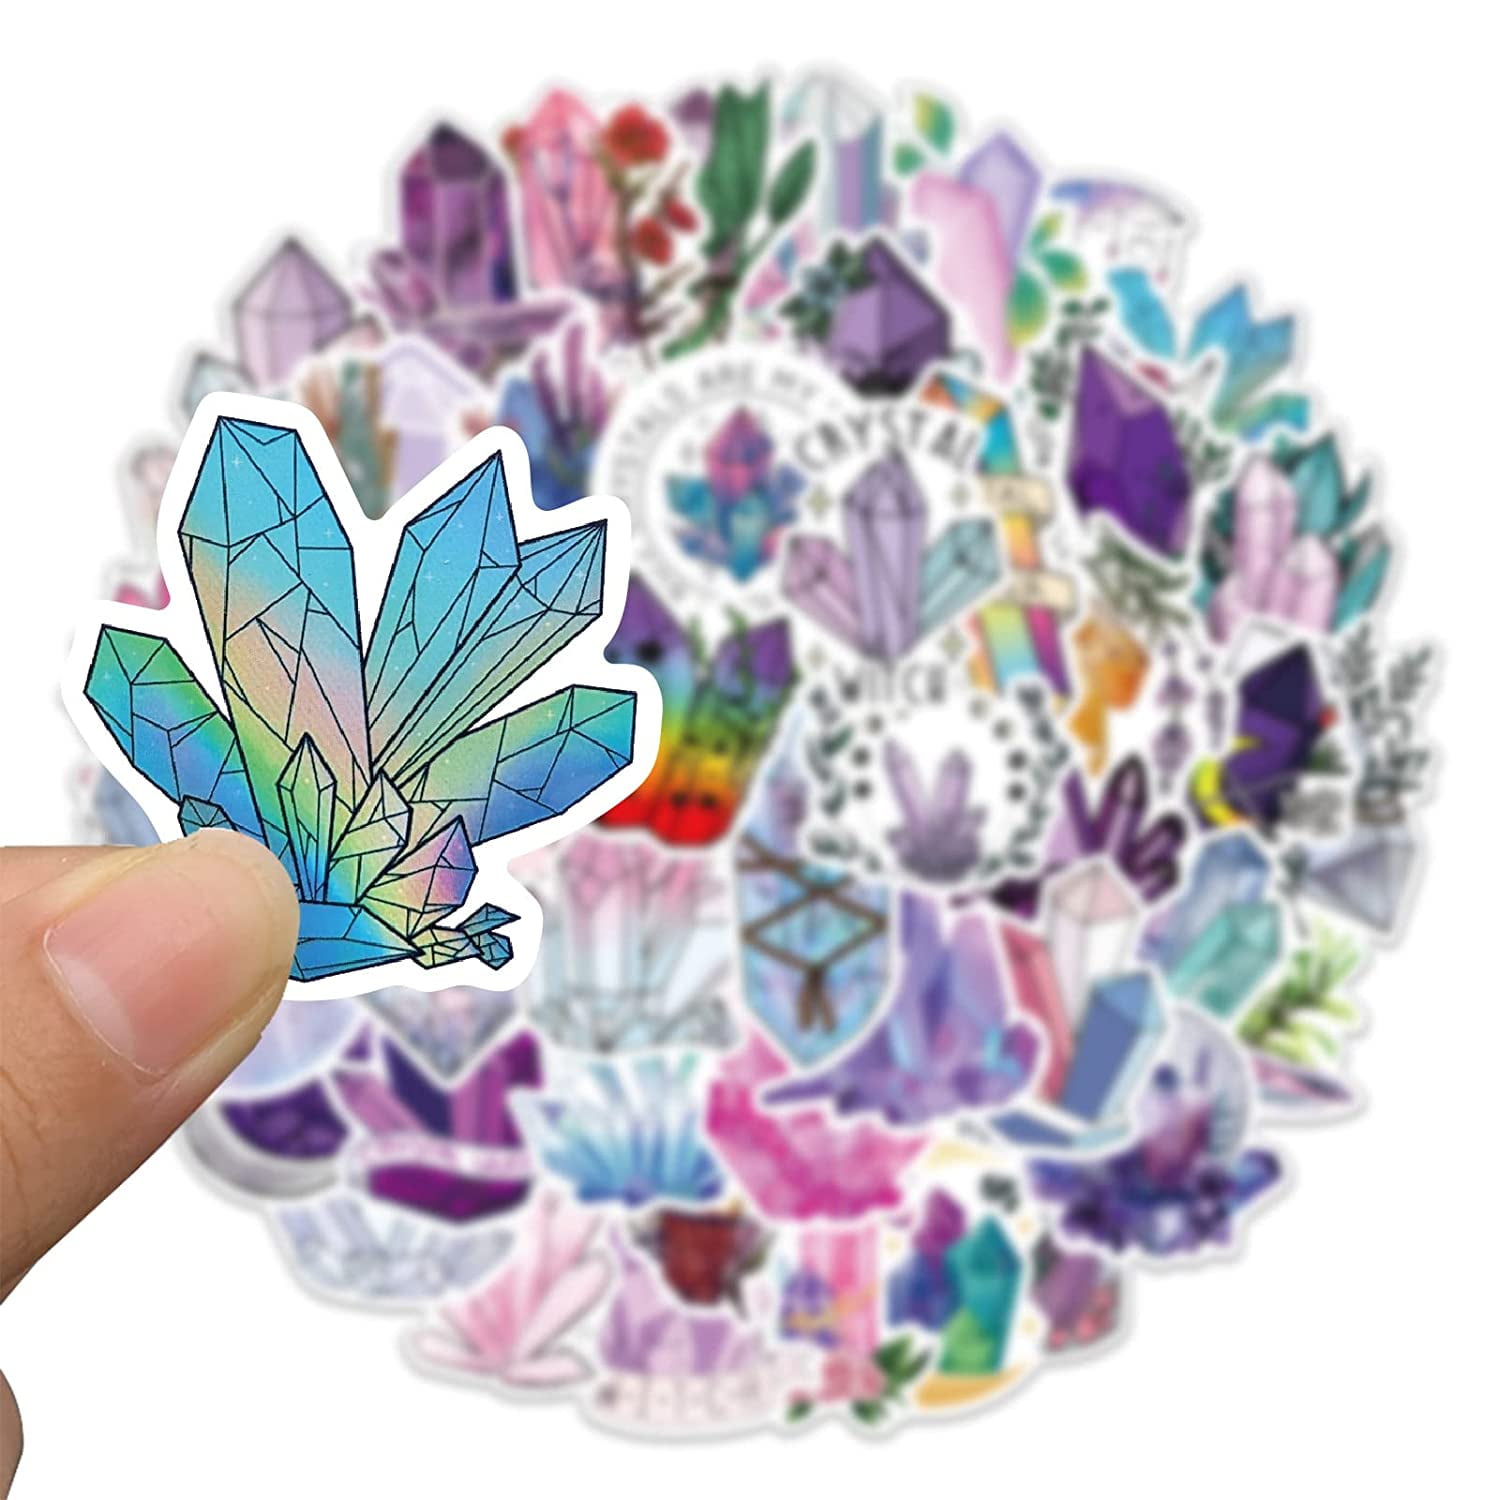 Watercolor Crystal Stickers 700 Counts Aesthetic Art Crafts Gem Diamond Stickers for Water Bottle Scrapbook Calendar Planner Stickers for Kids Girls